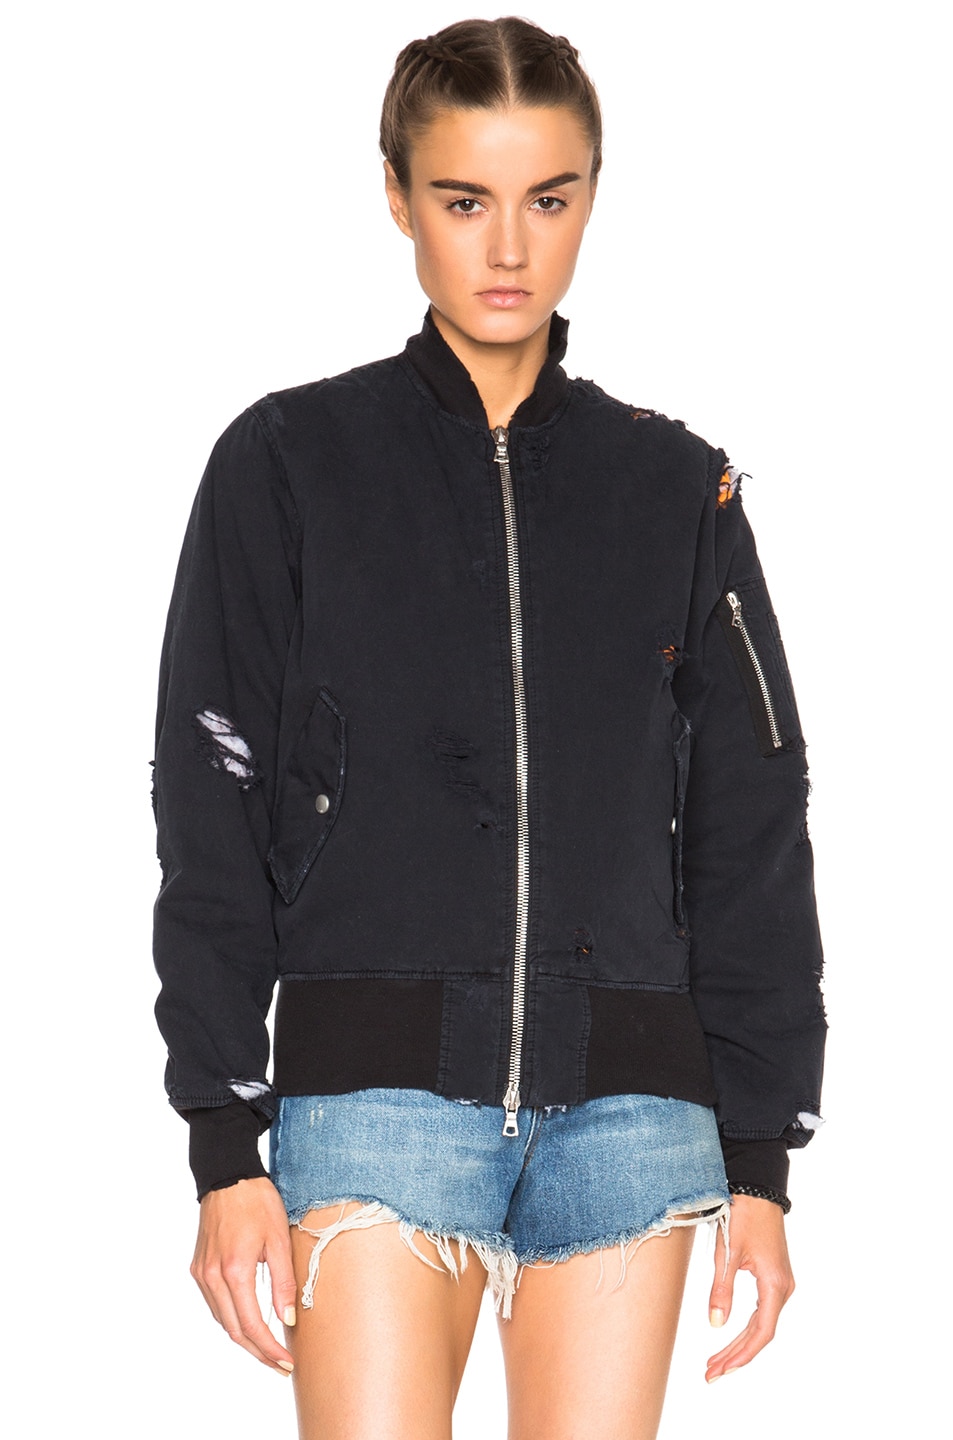 Unravel FWRD Exclusive Destroyed Twill Bomber Jacket in Black | FWRD